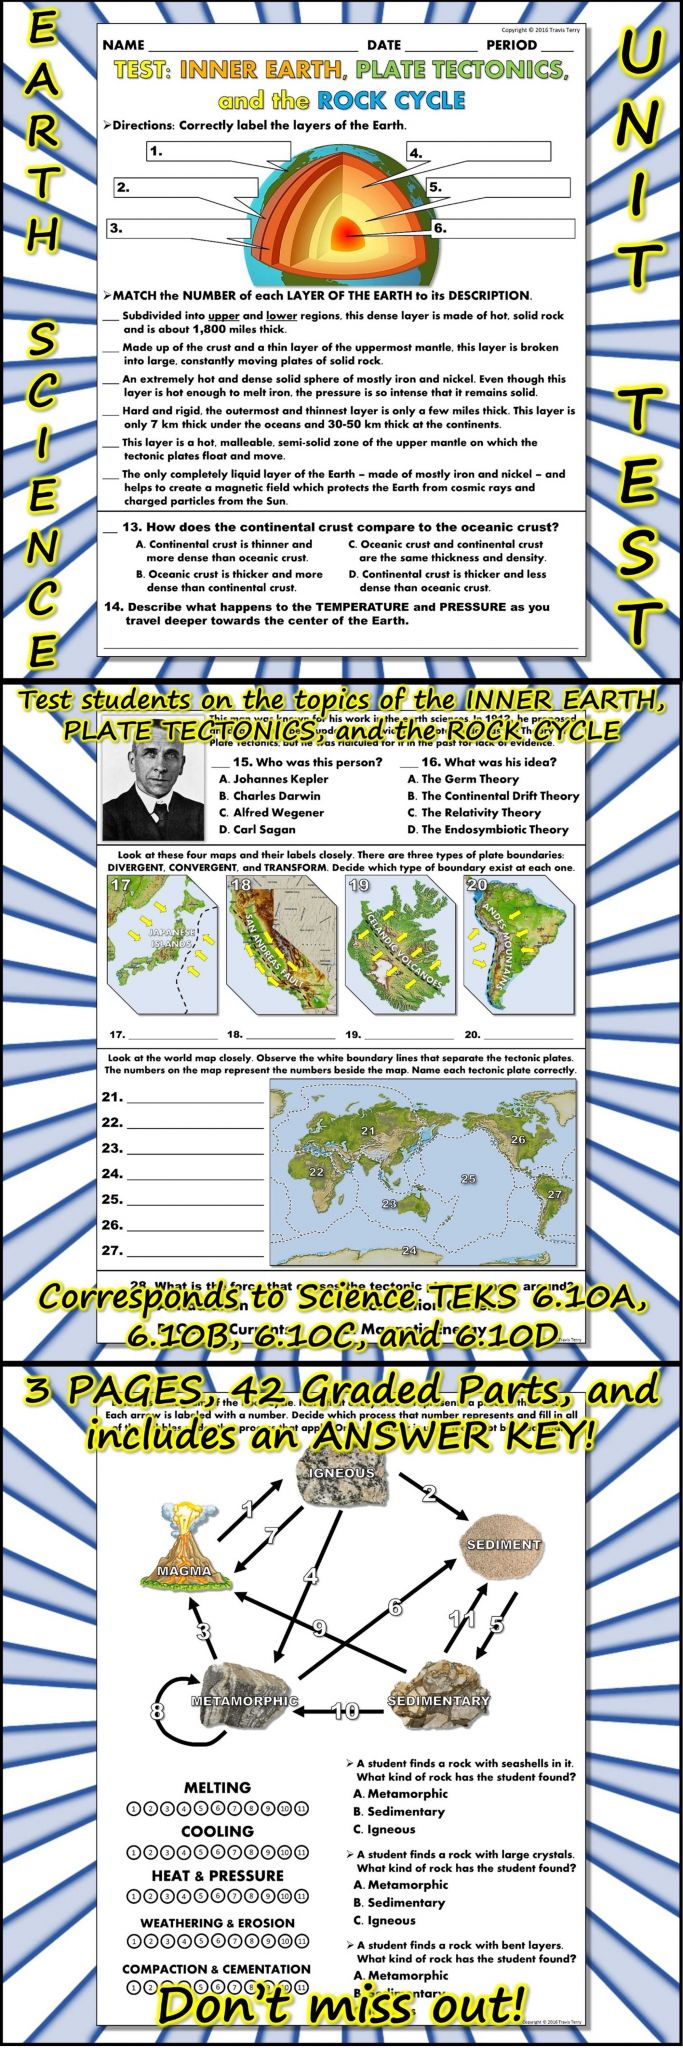 Plate Tectonics Worksheet Answer Key together with Test Inner Earth Plate Tectonics and the Rock Cycle